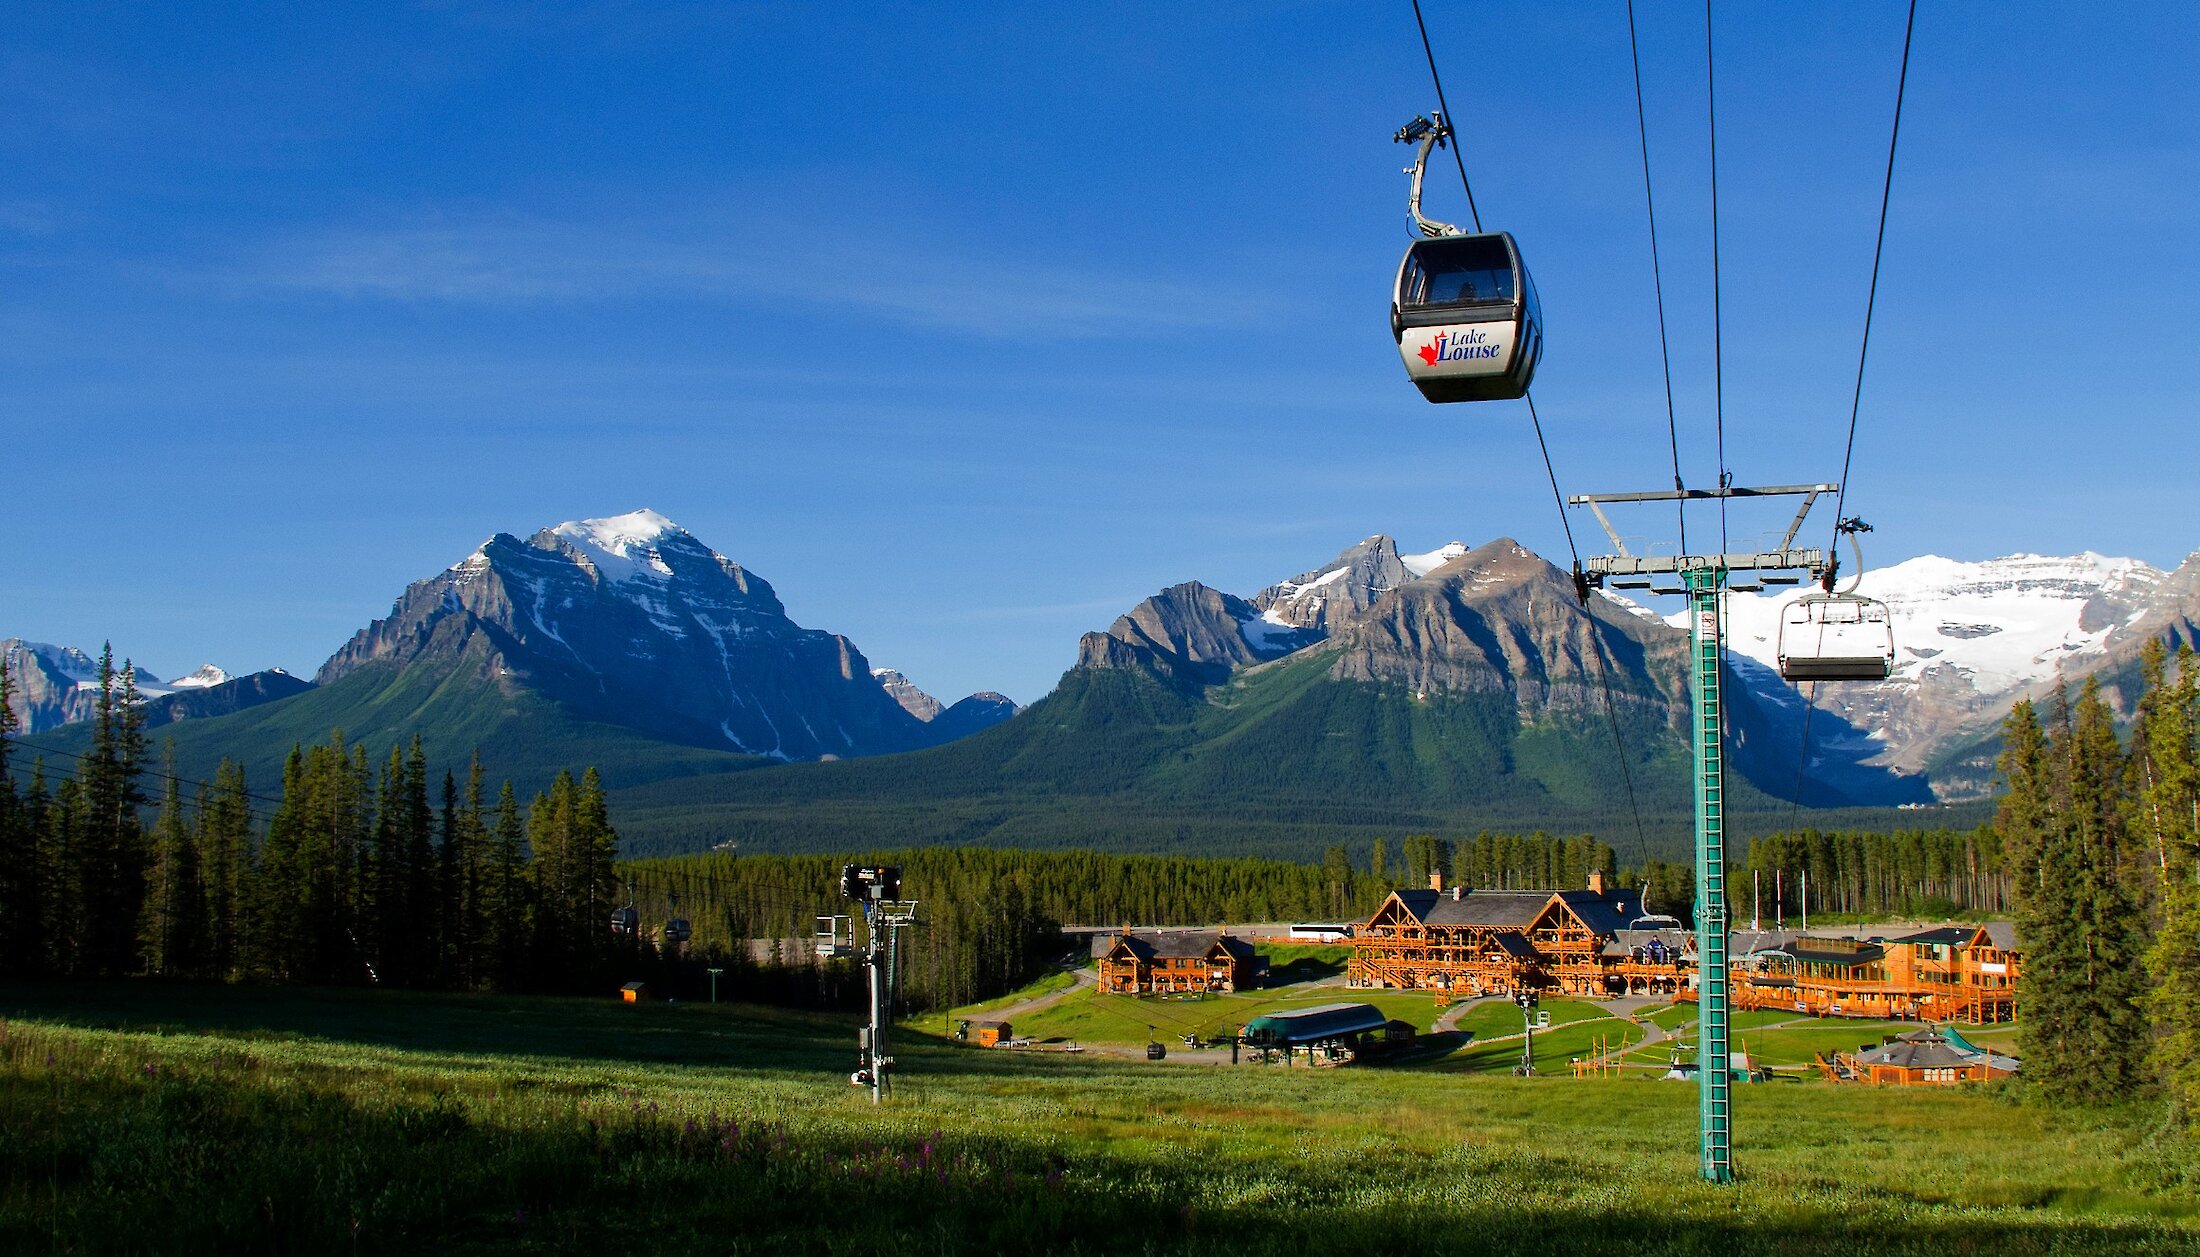 The Lake Louise sightseeing Gondola coming over the luscious green grass